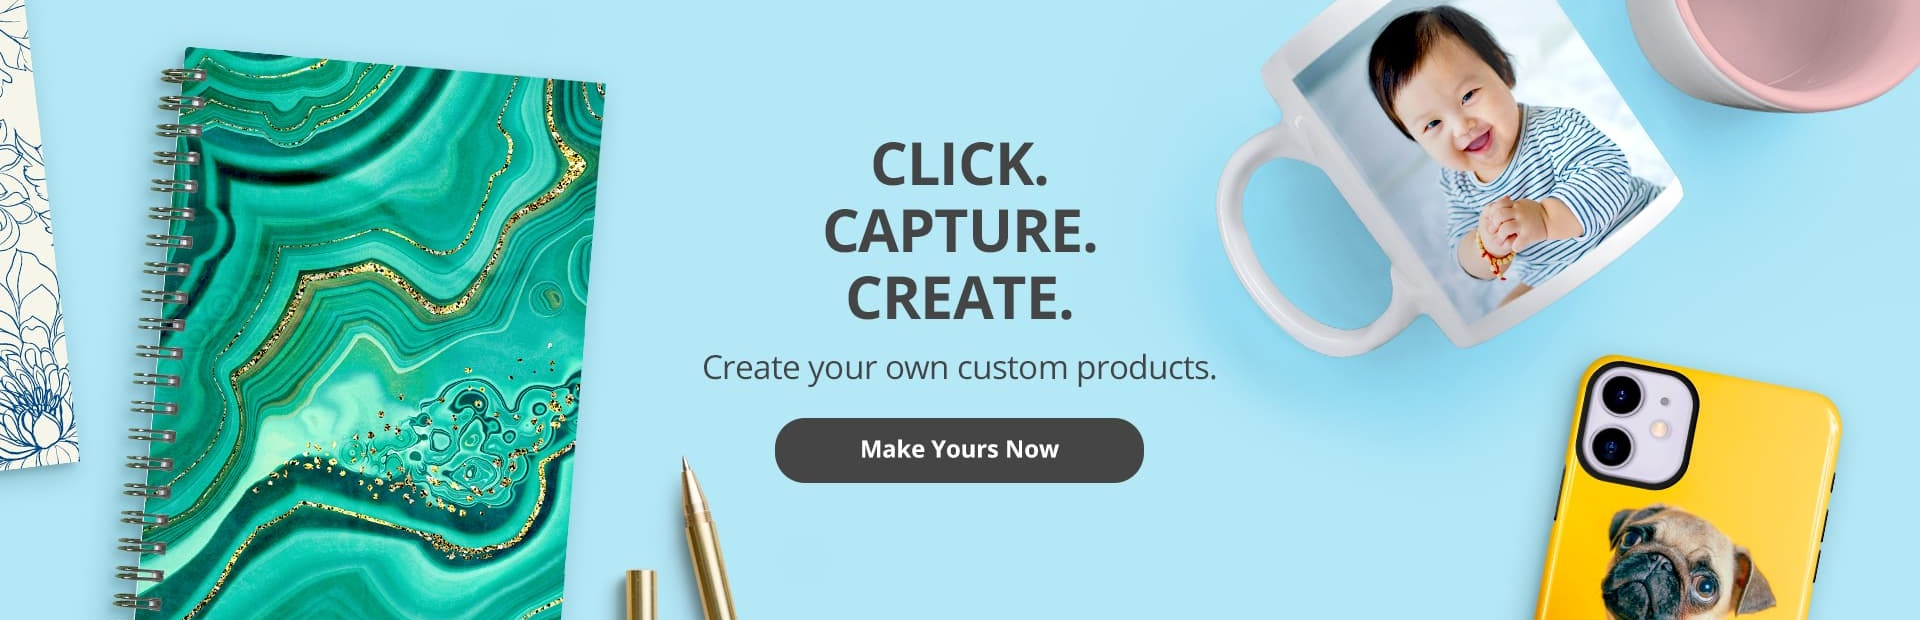 10 Websites to Create and Send the Best Personalized Gifts